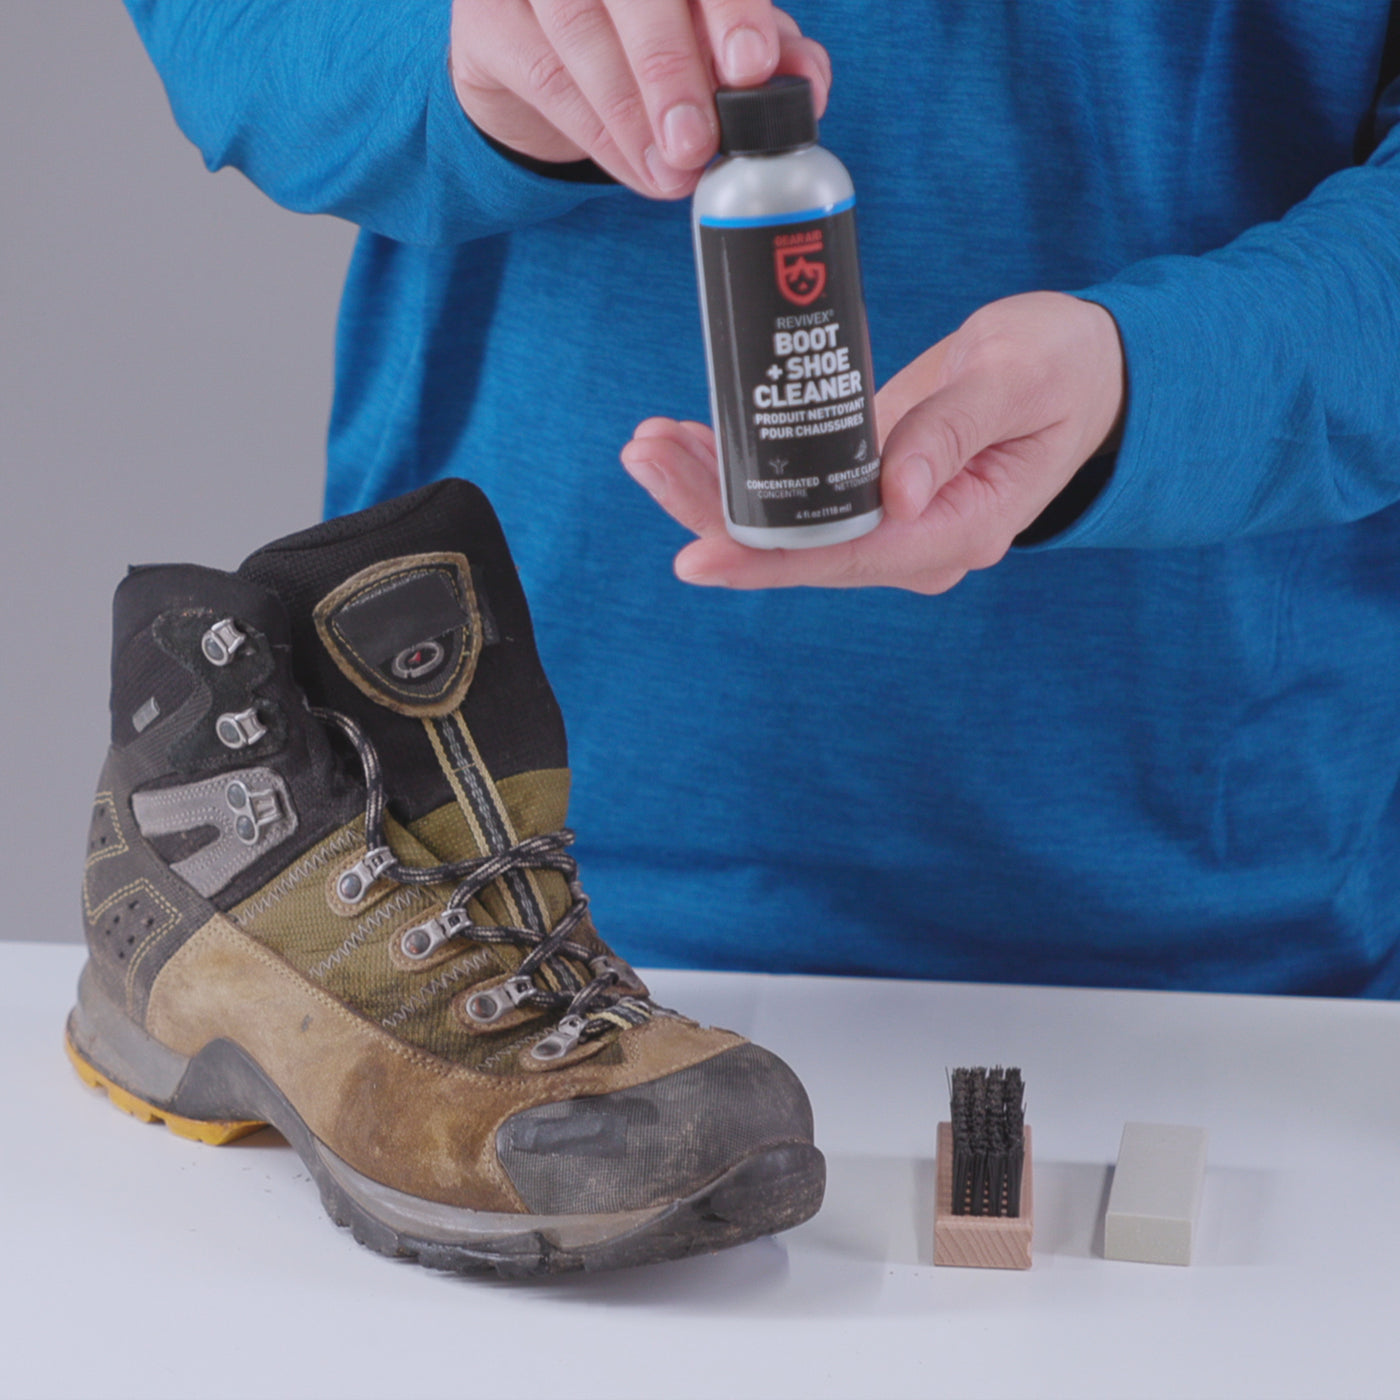 Gear Aid Revivex Boot Cleaner – Jesse Brown's Outdoors